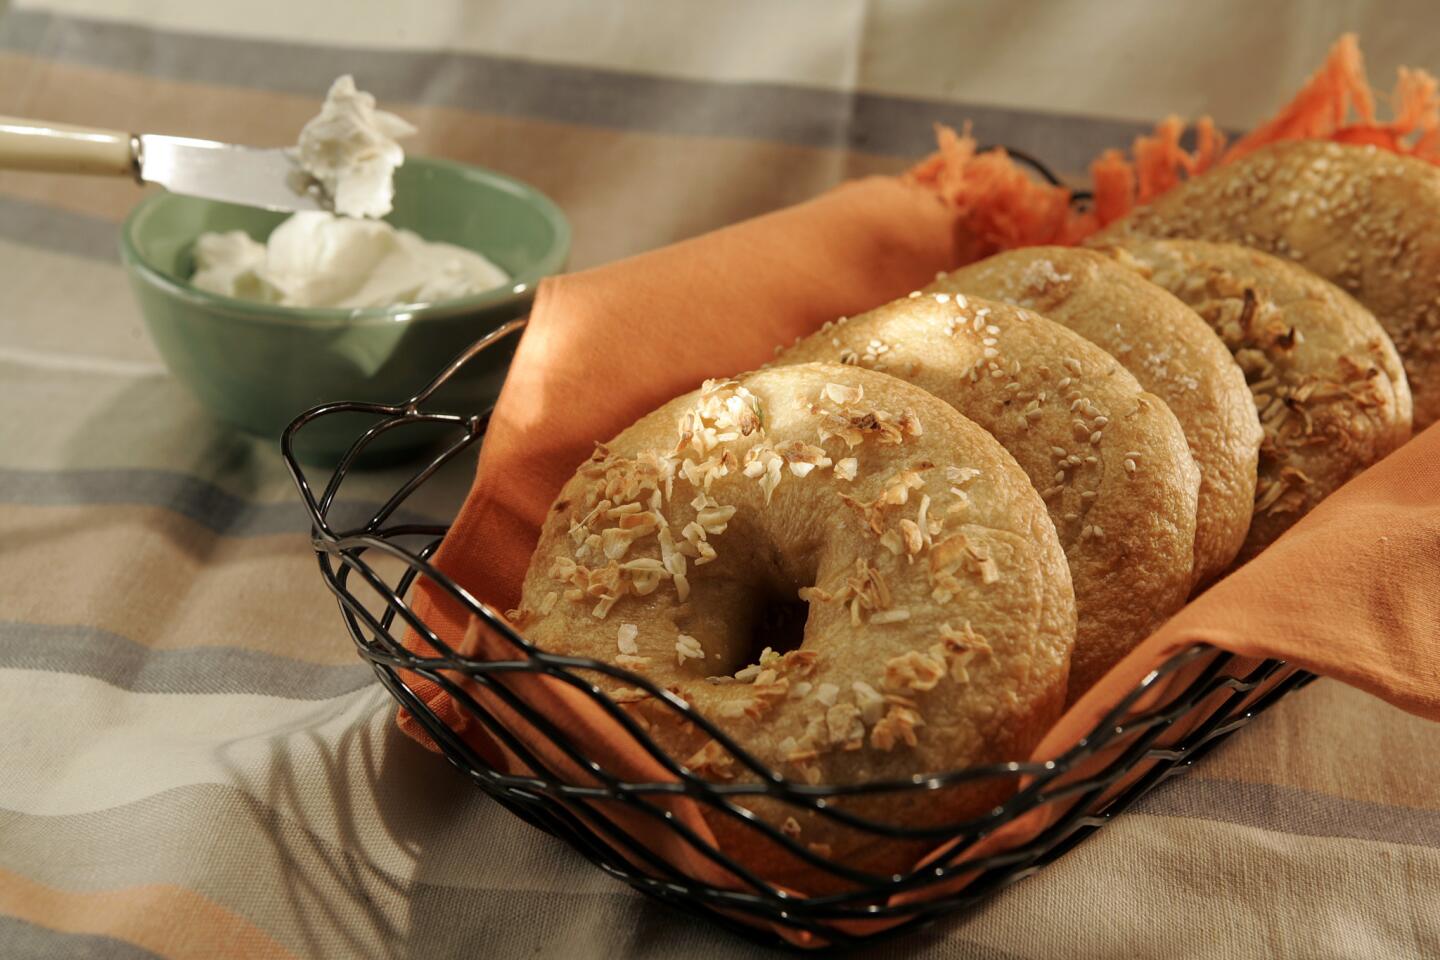 Any flavor bagels are easy to make. Simple ingredients ferment, then comes a fast boil and bake. Make fresh bagels for Mom this Mother's Day.